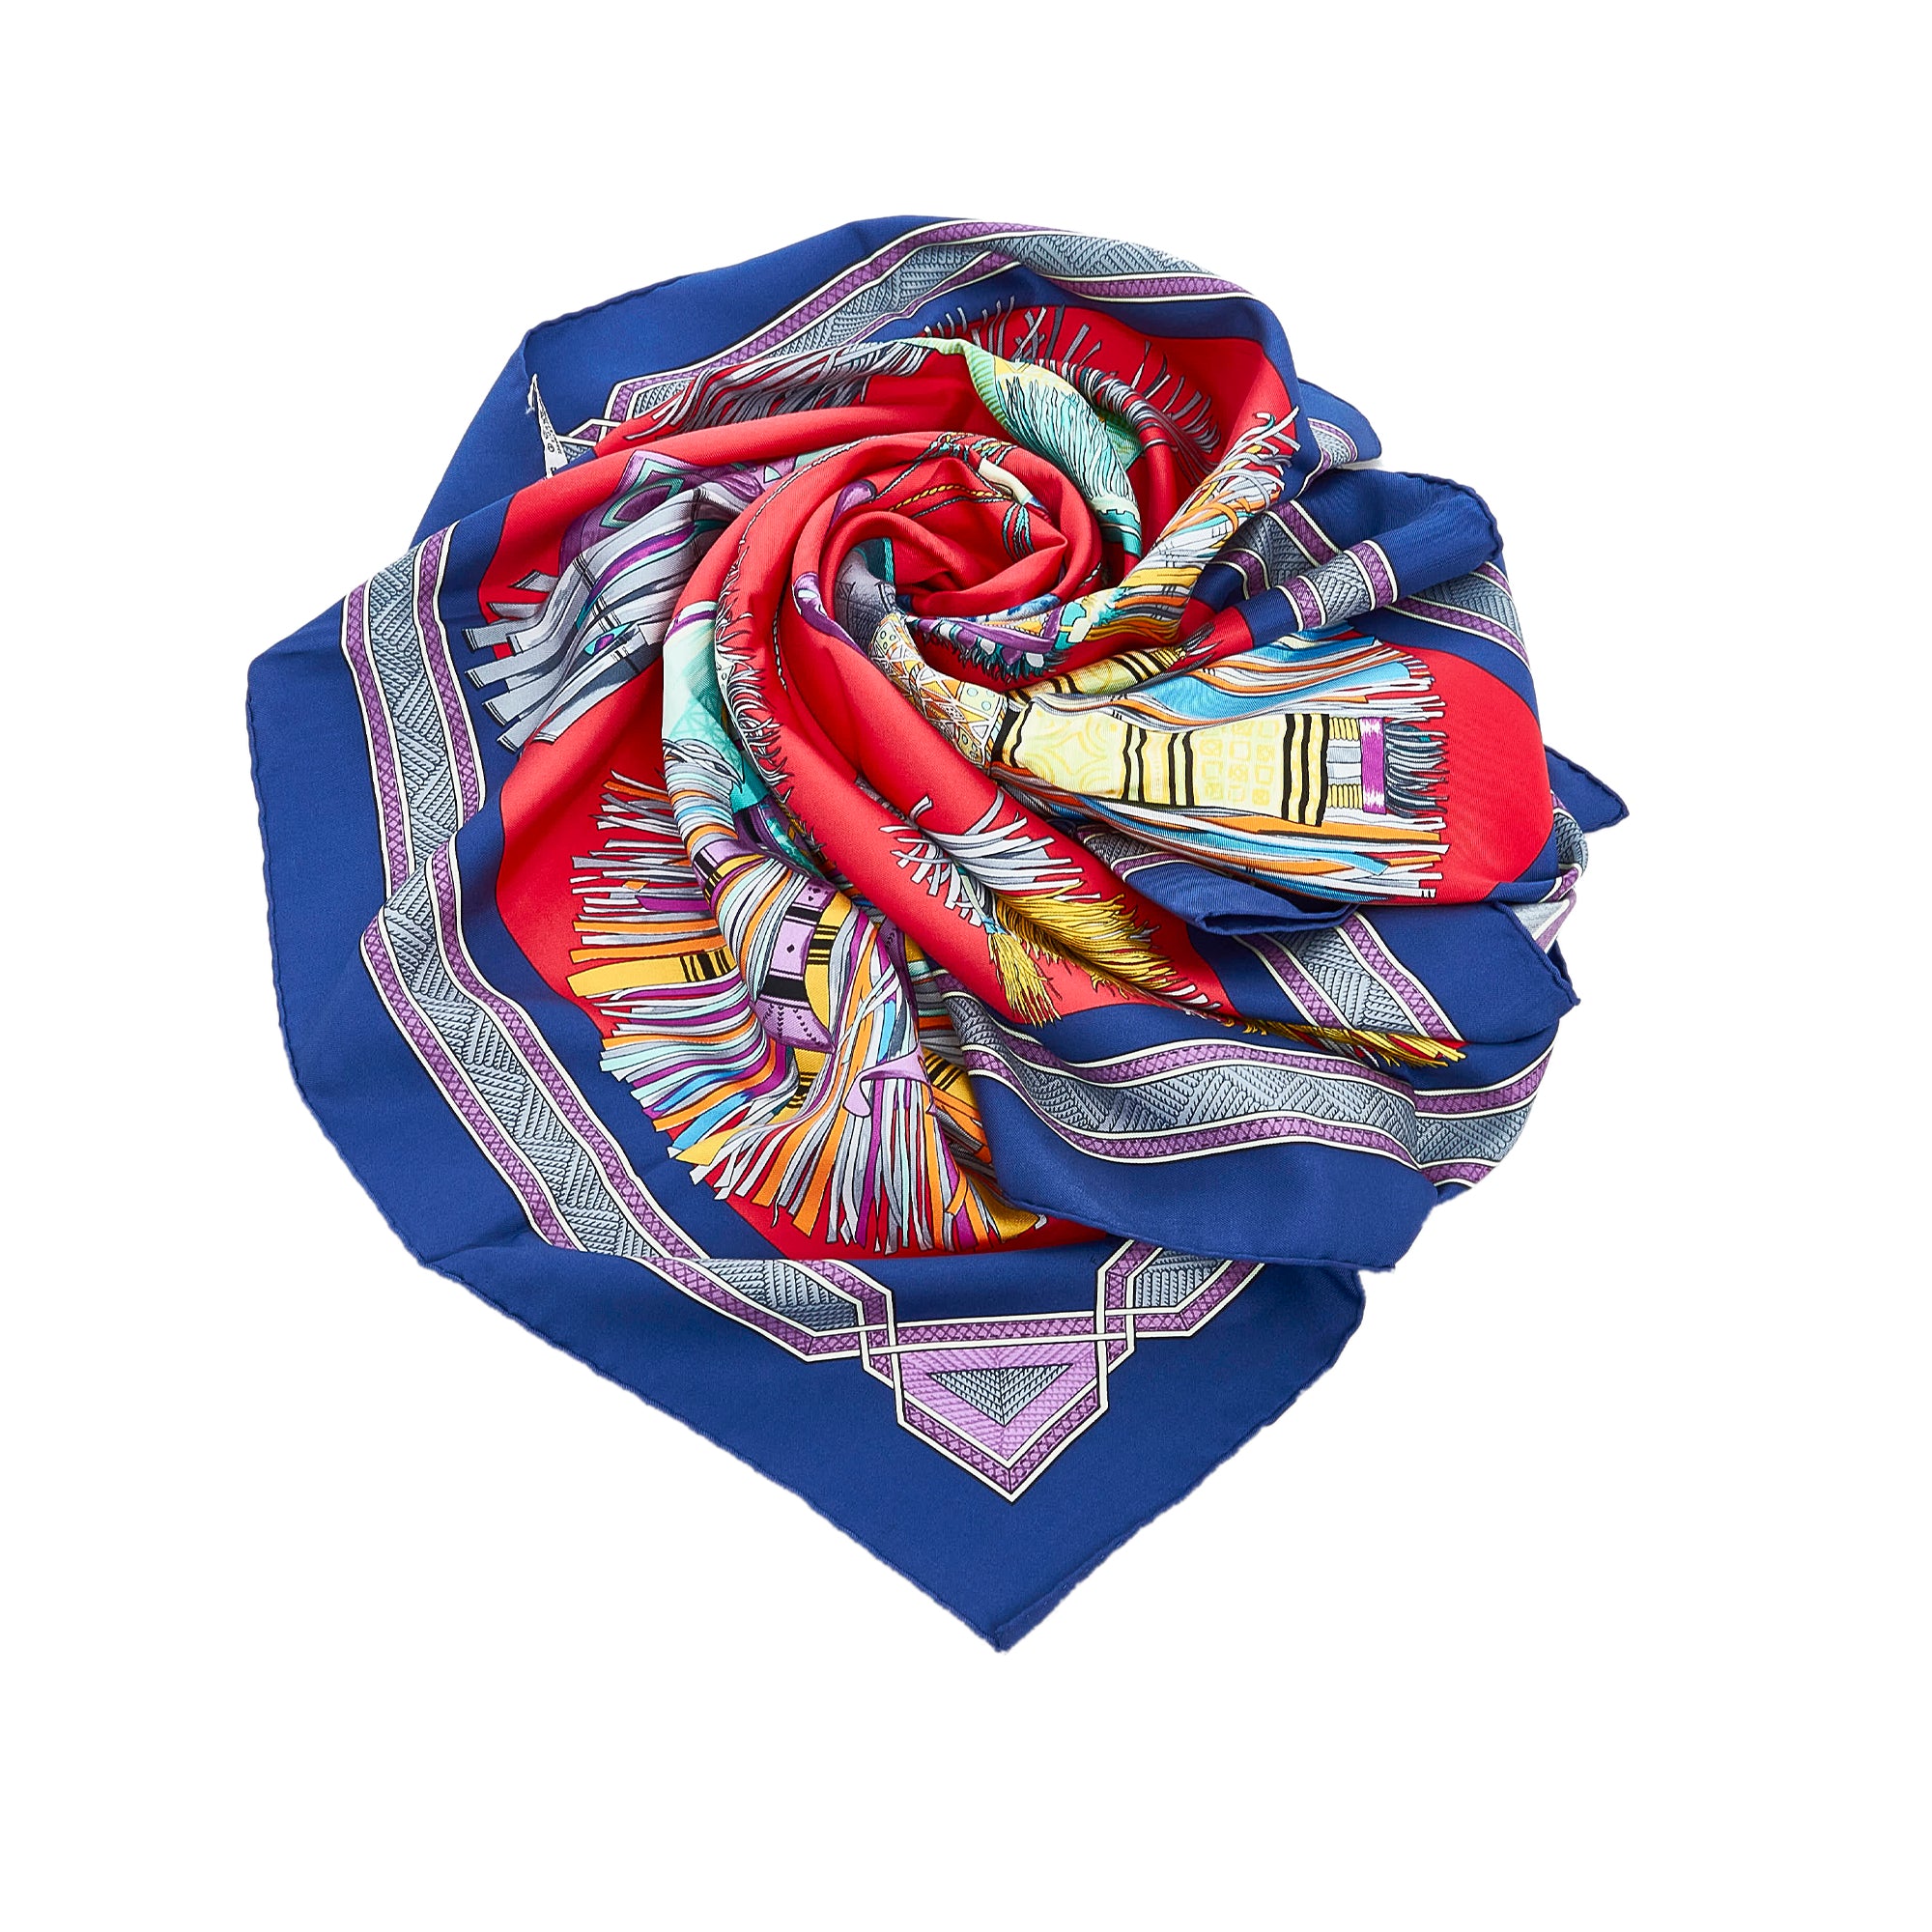 Laura Jean's Consignments - NEW Louis Vuitton Scarf! Current